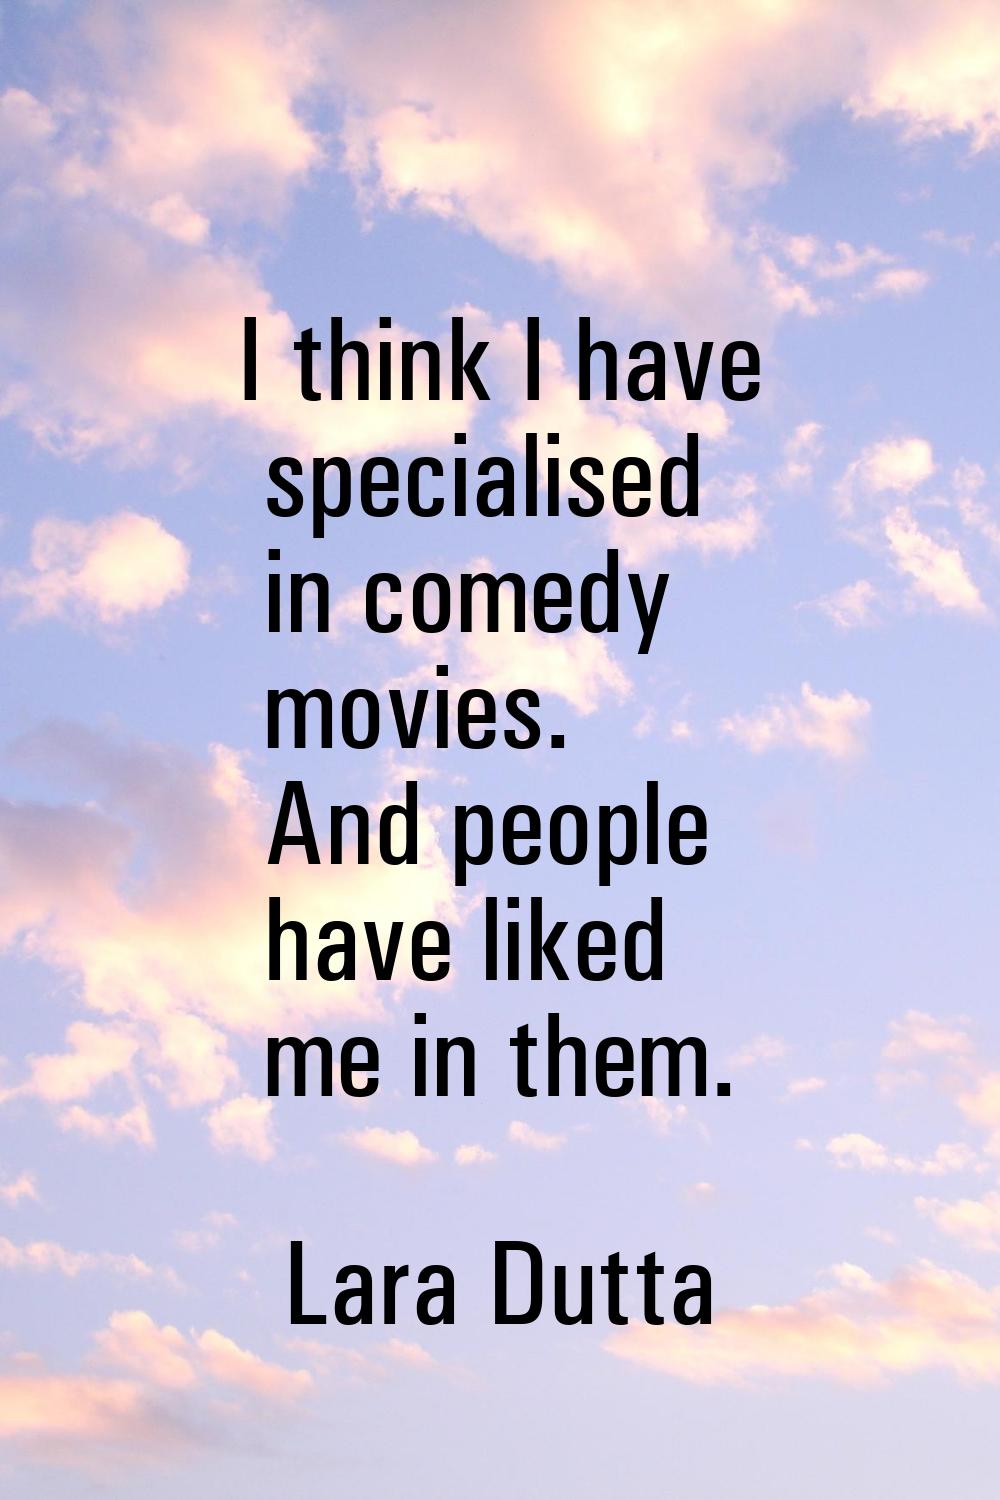 I think I have specialised in comedy movies. And people have liked me in them.